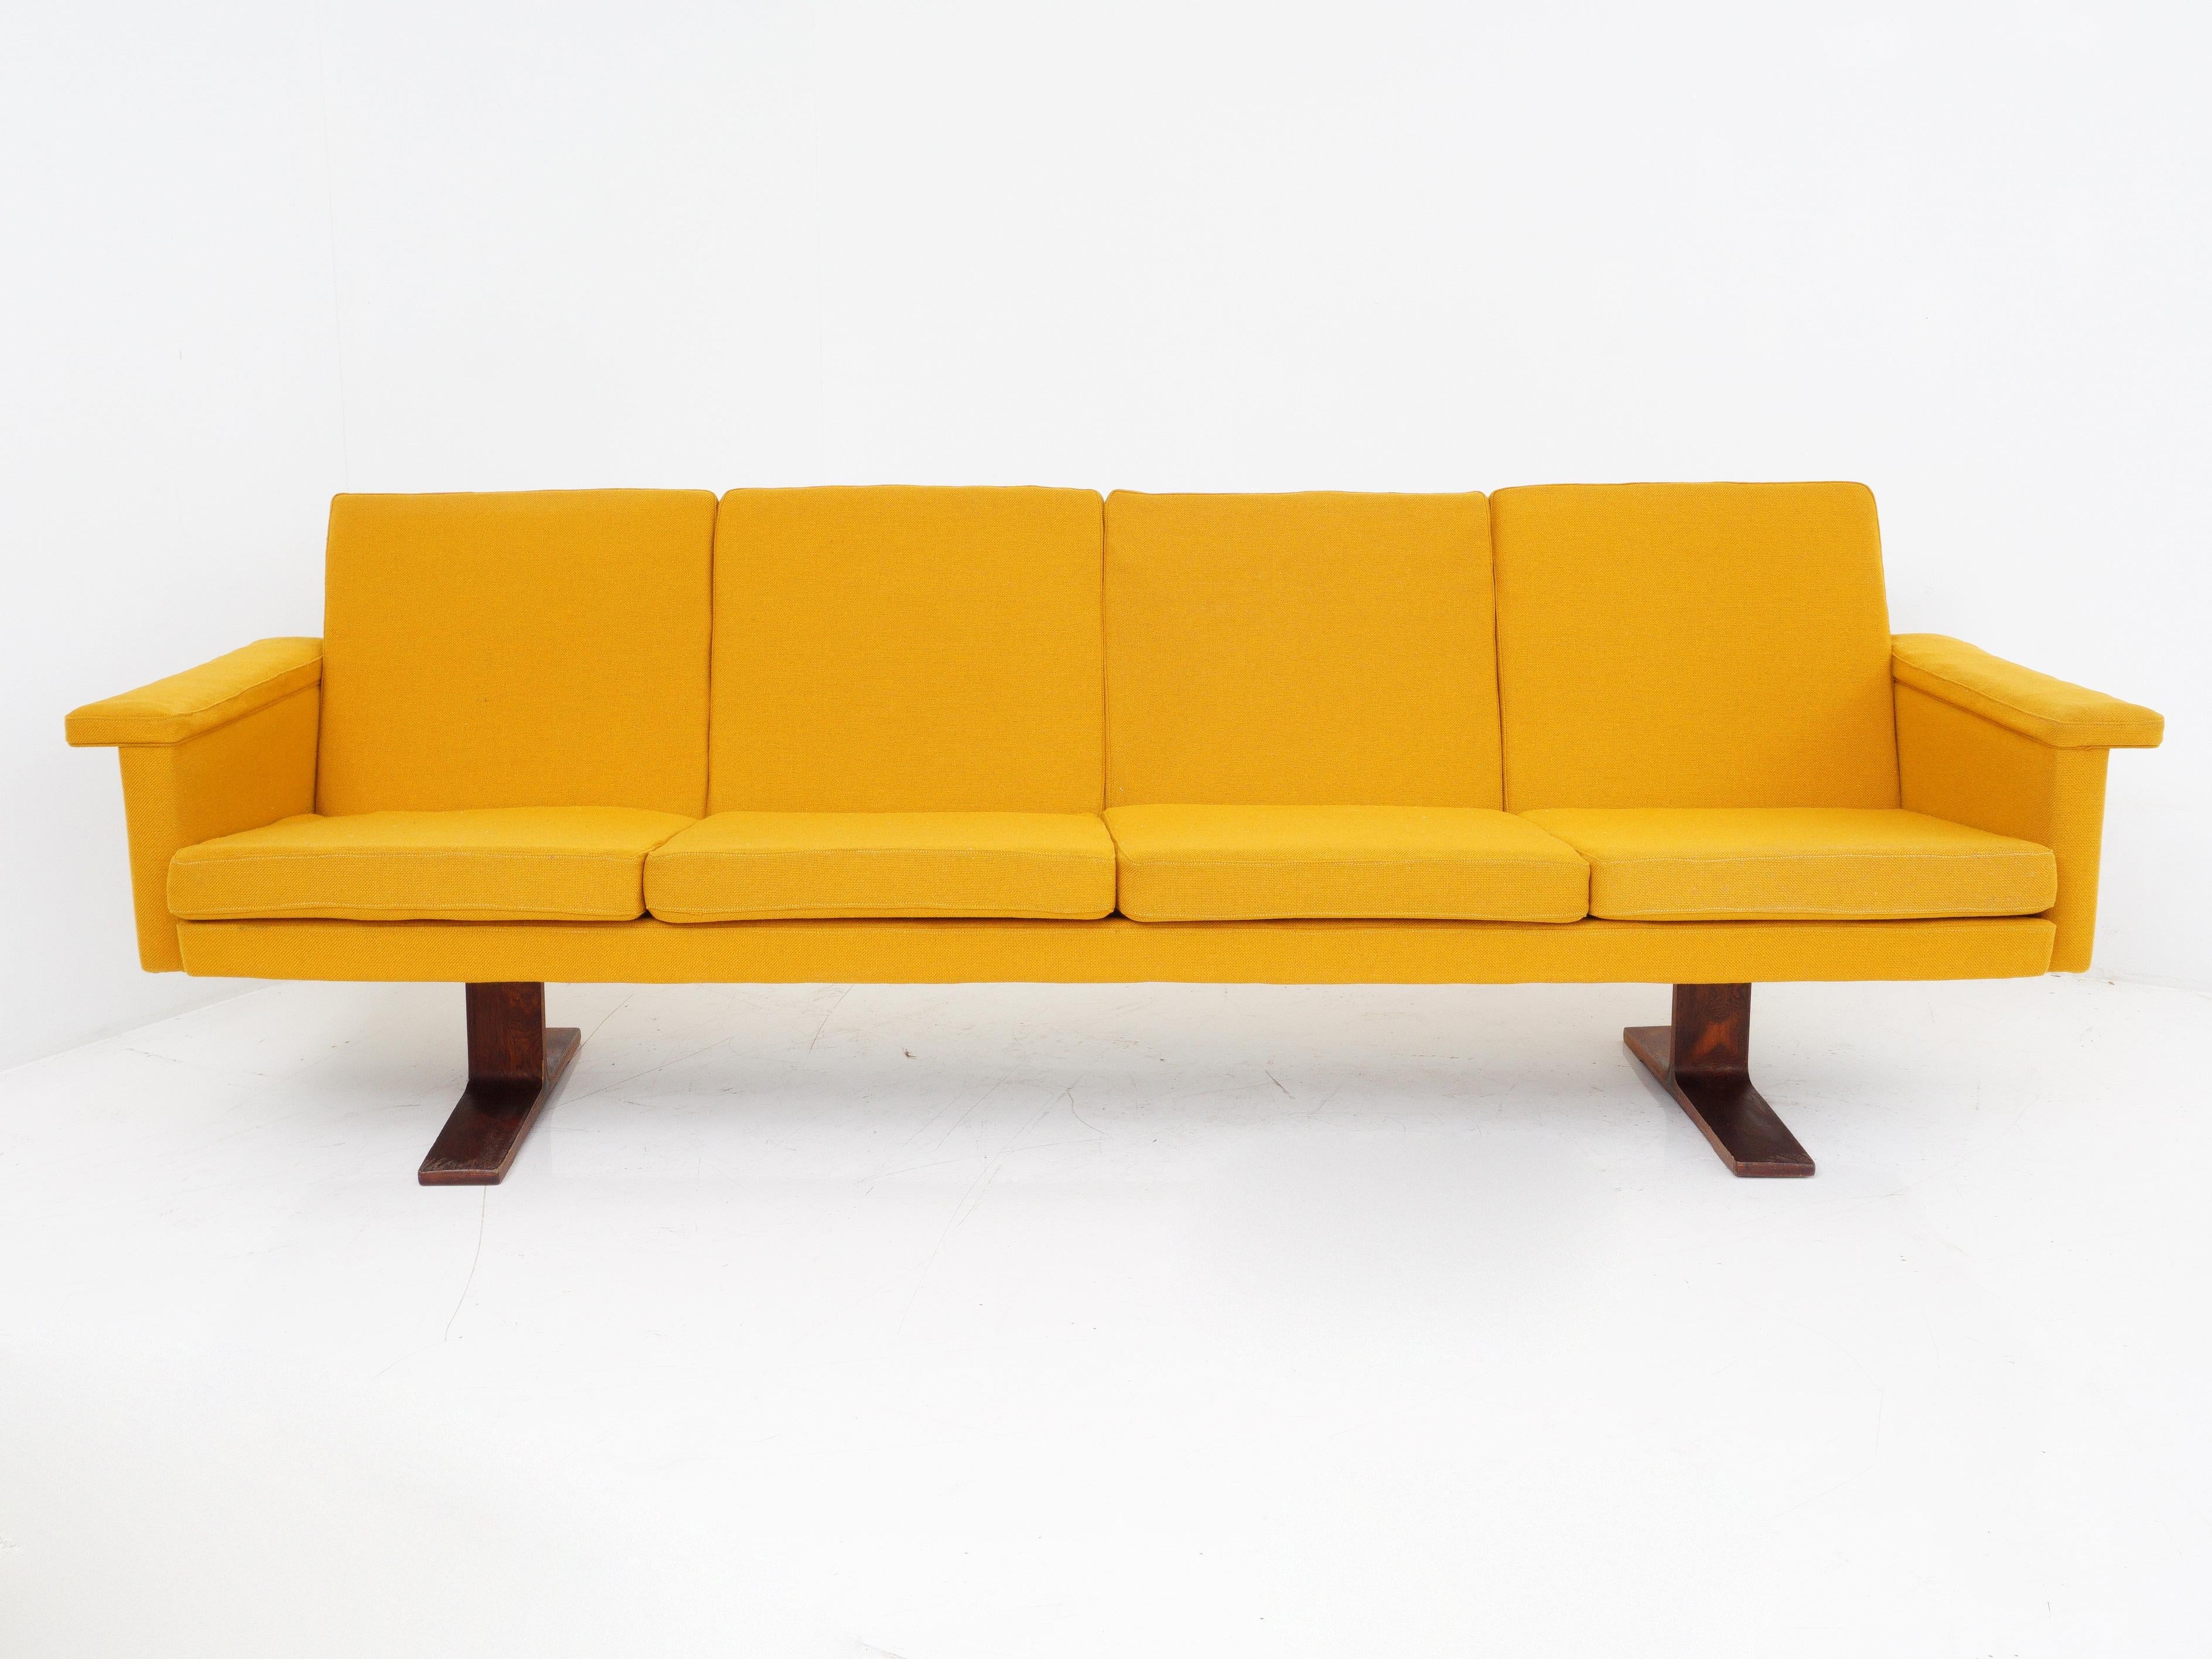 Spice up your space with a dash of mustard-yellow magic. This Mid-Century Modern sofa is like a funky dance party waiting to happen. Get ready to groove and lounge in style!

- 27